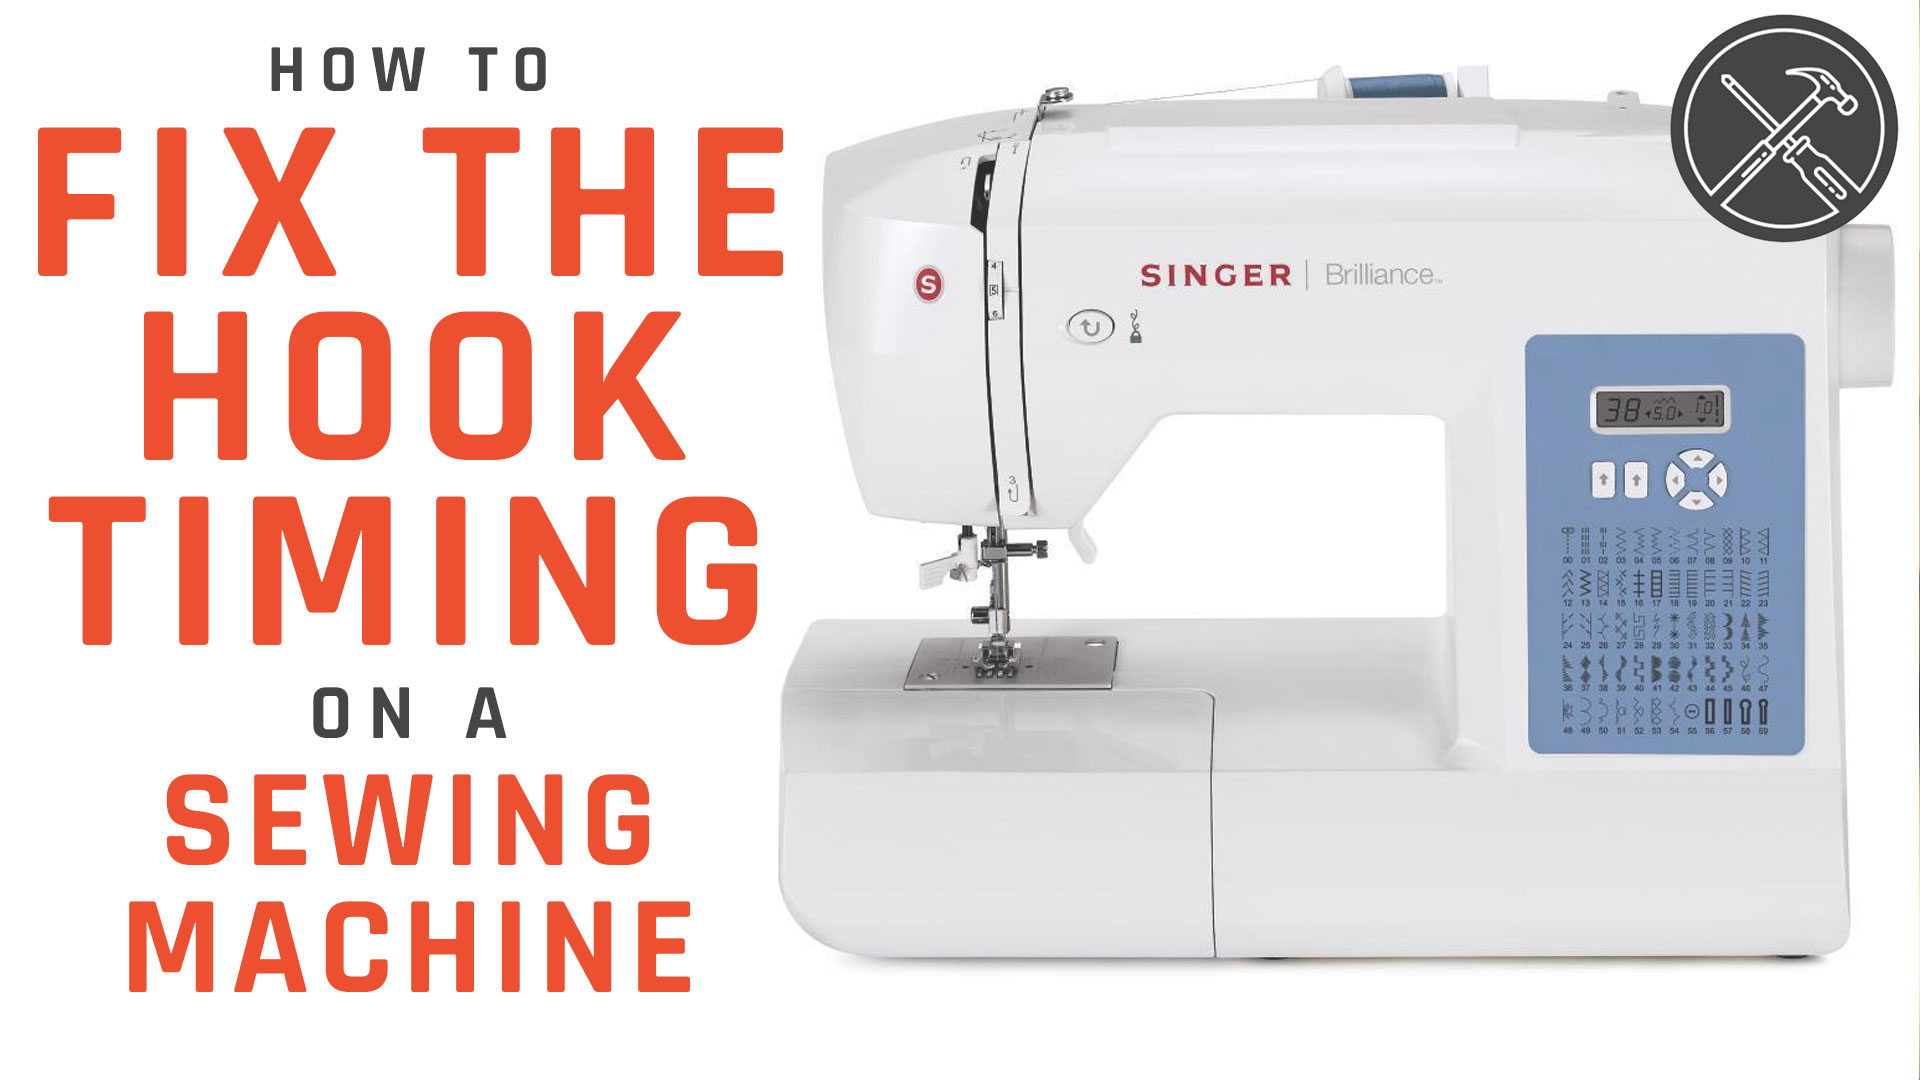 How To Fix The Hook Timing On A Sewing Machine Lrn Diy